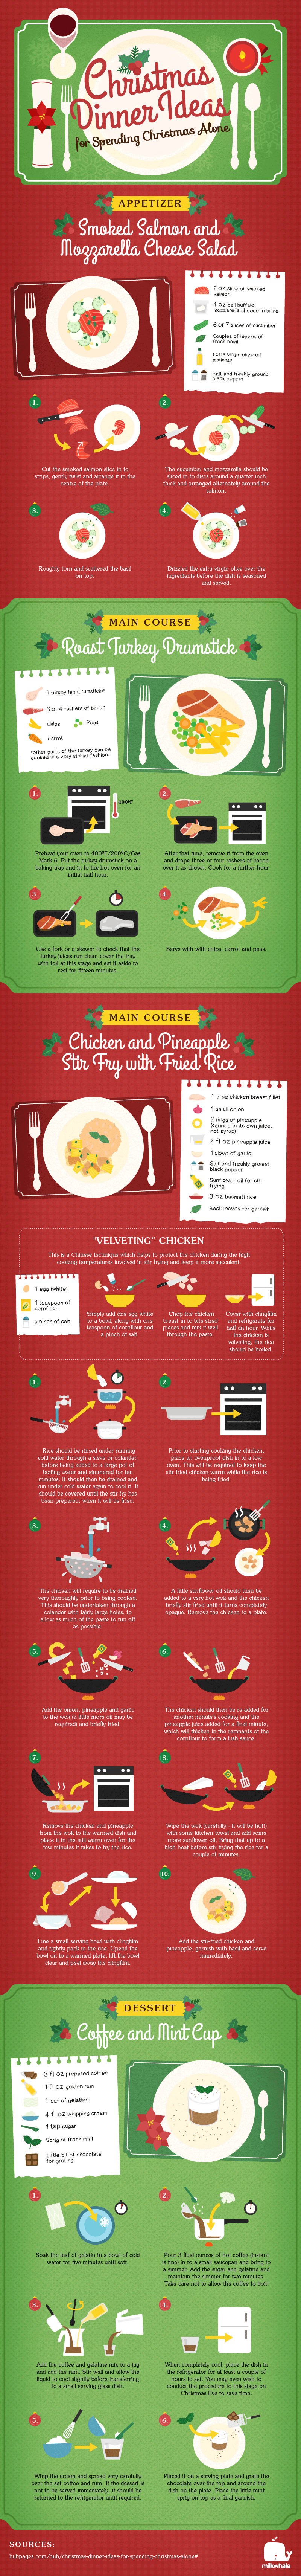 Infographic for Christmas Dinner Ideas You Need To Know